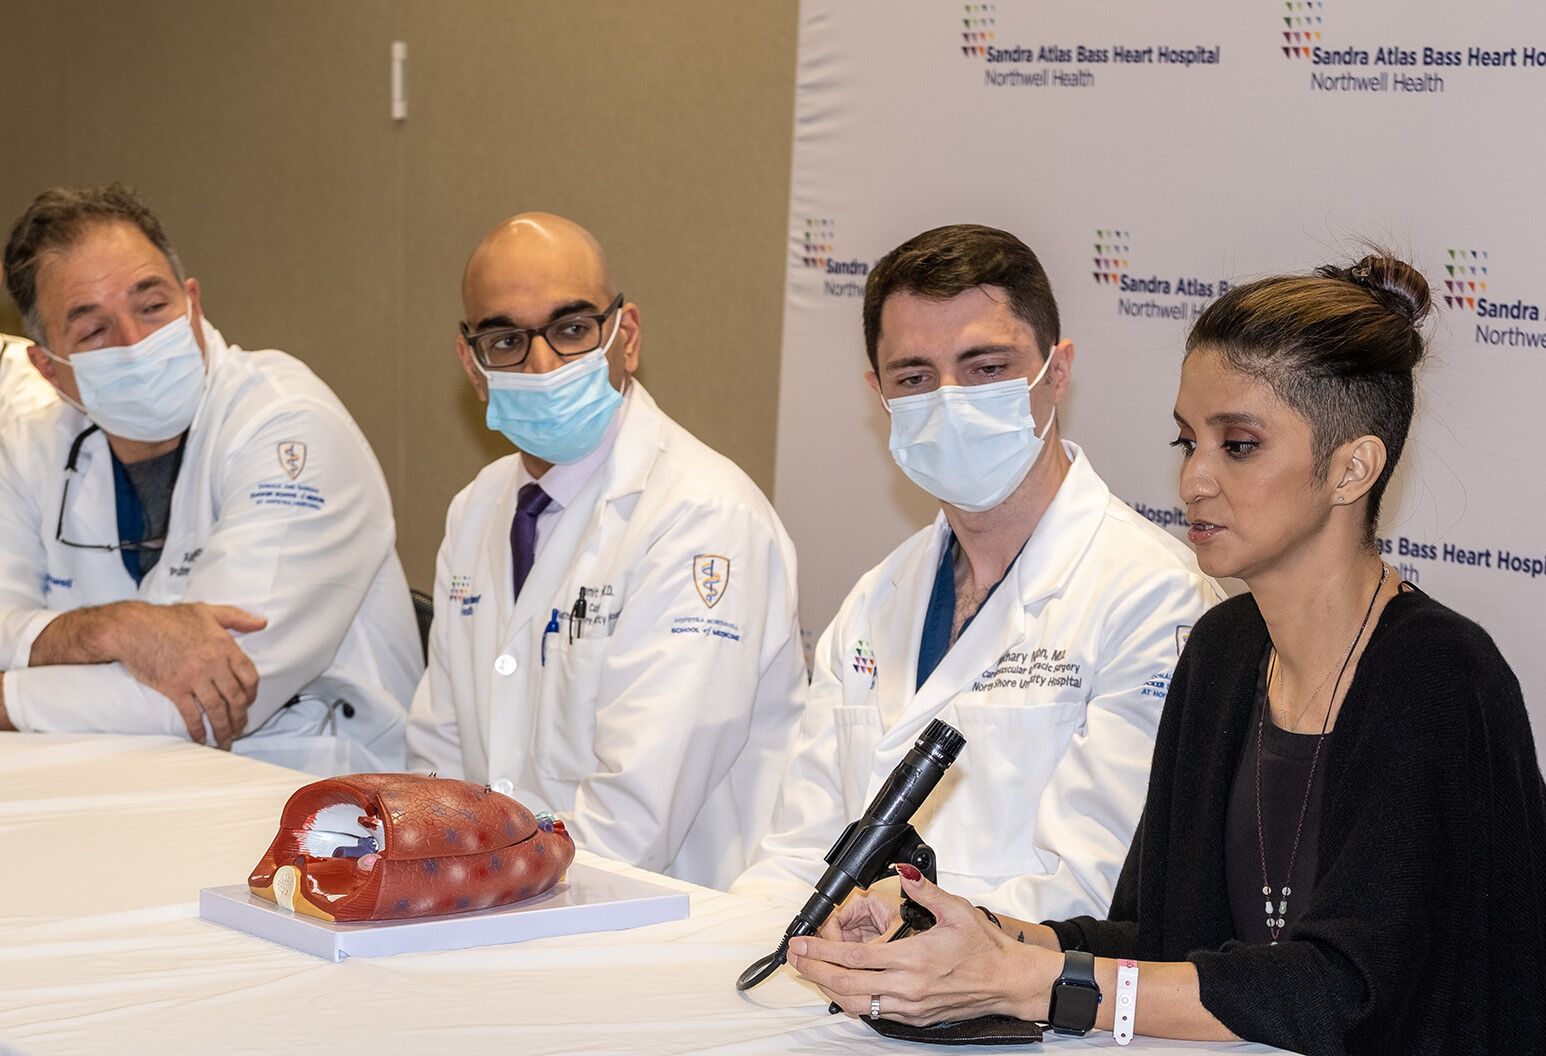 A woman wearing a black shirt speaks into a microphone while four doctors wearing white lab coats and face masks look on. 